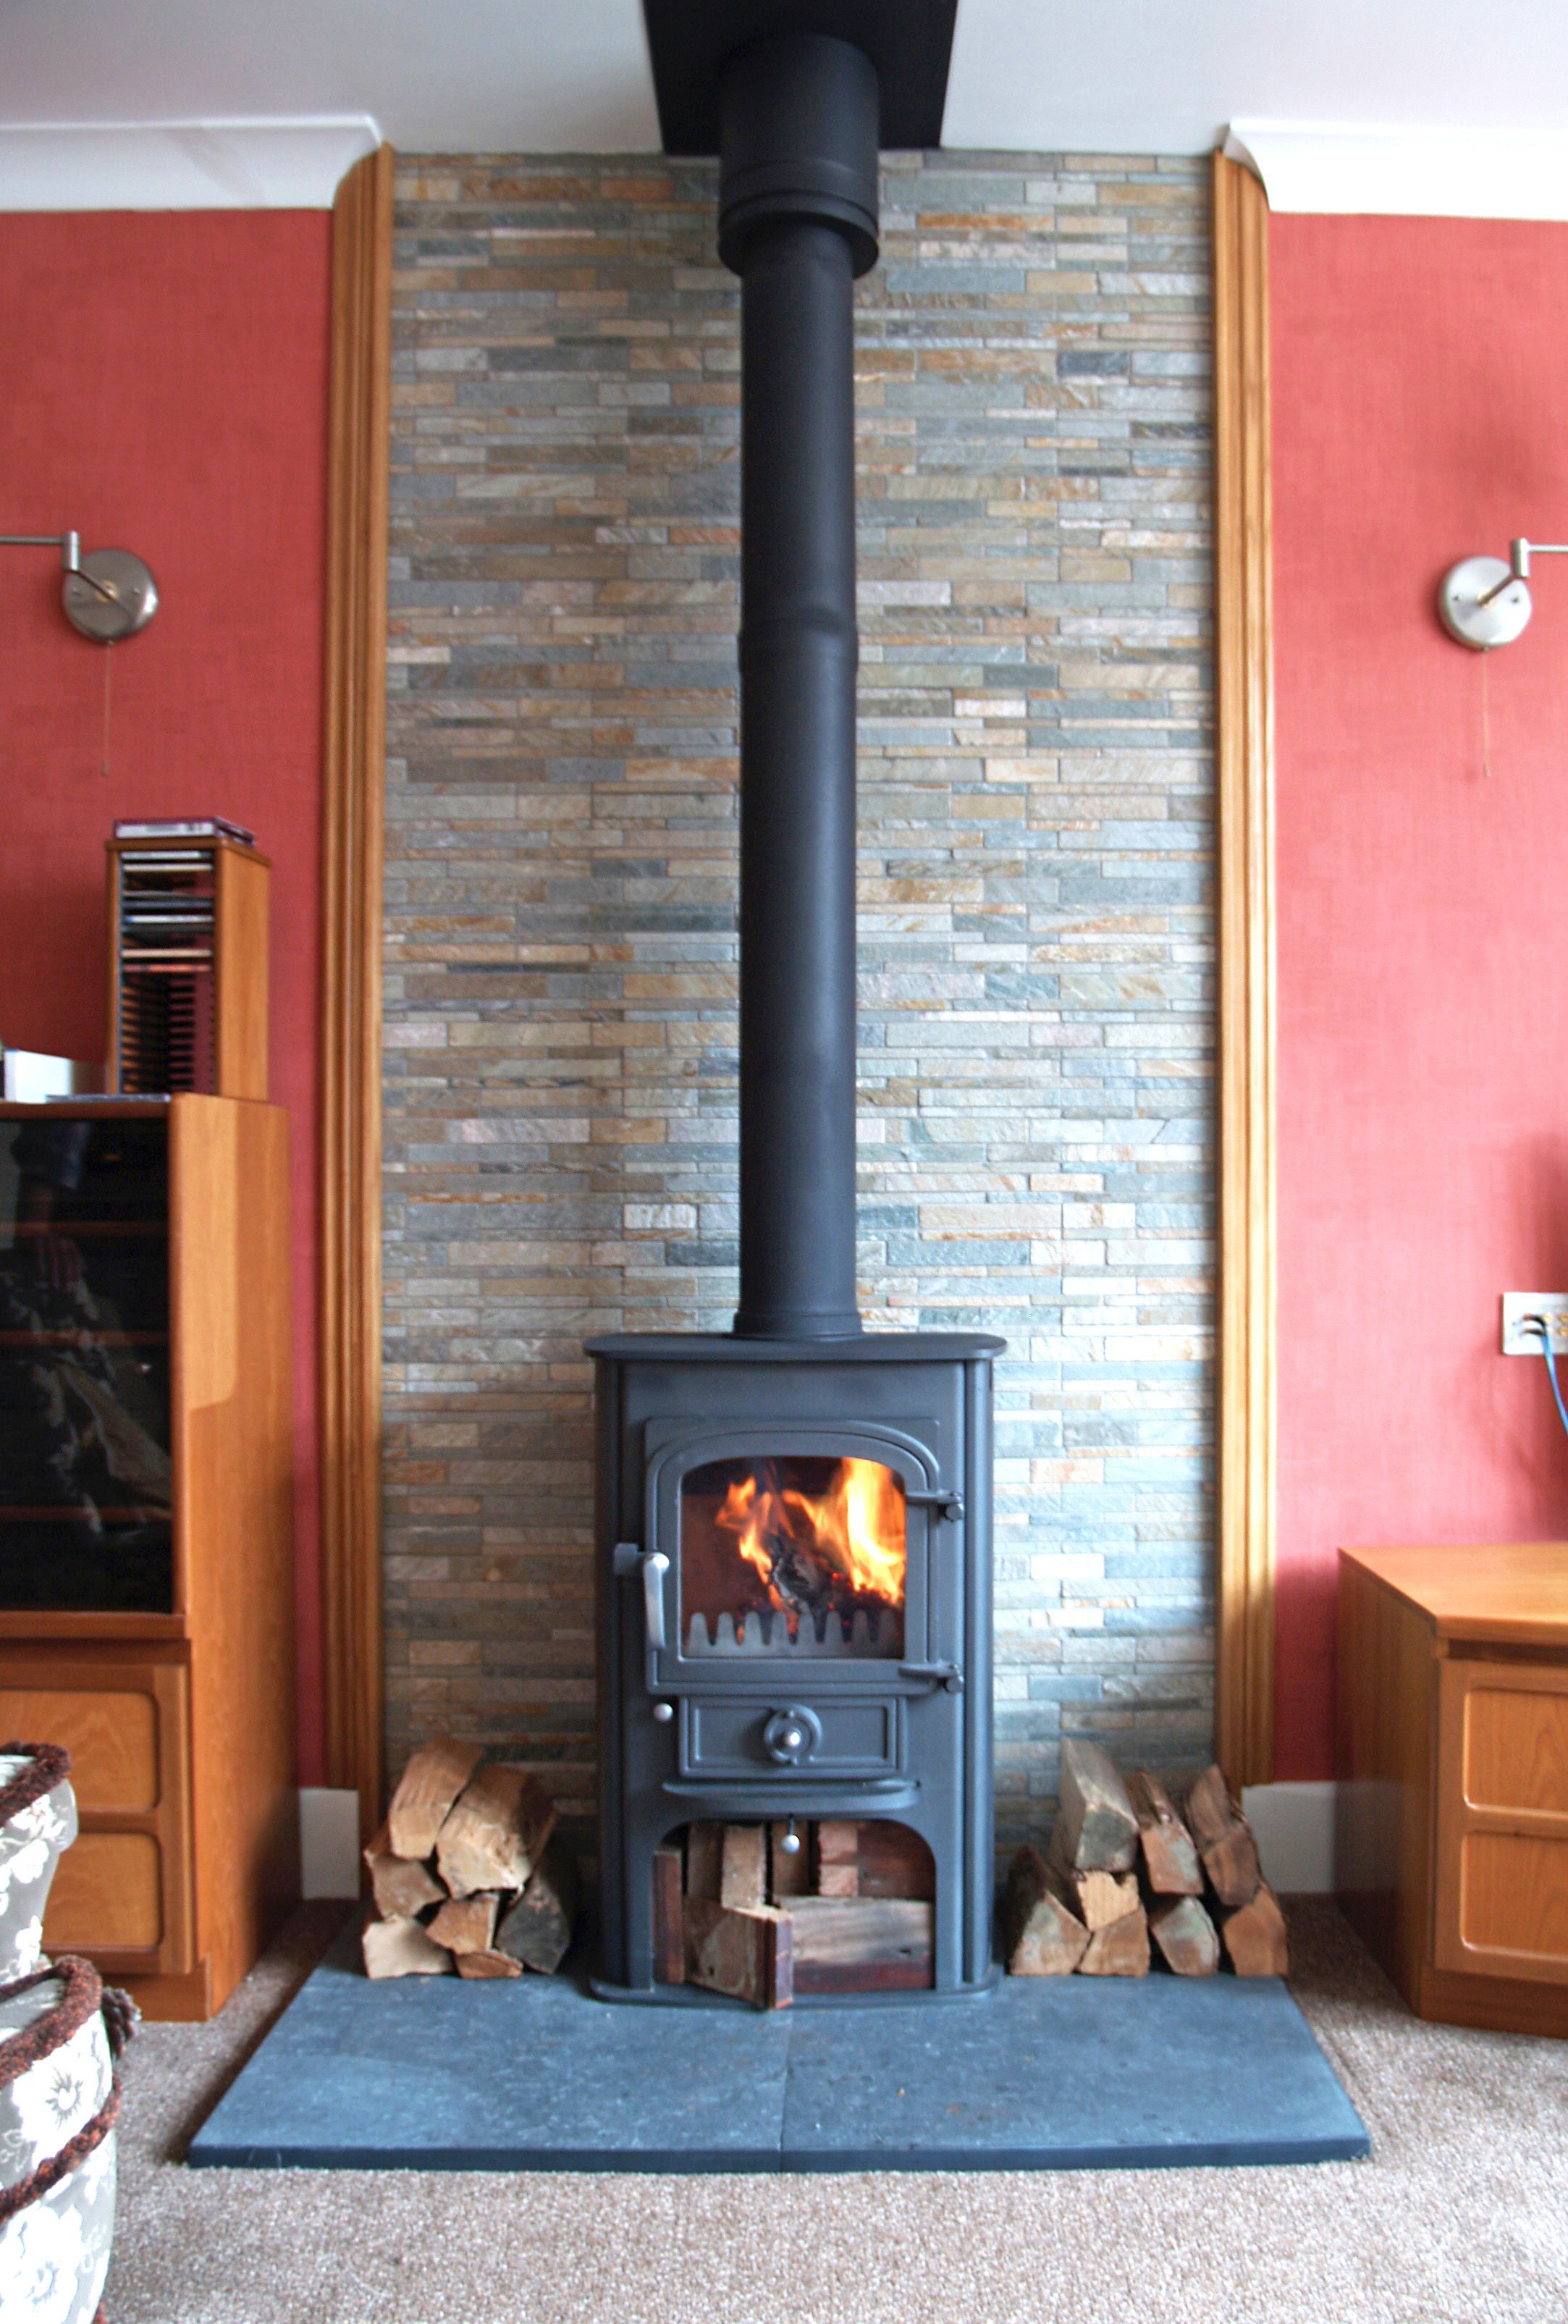 Watsons Fireplace Lovely Clearview solution 400 Multi Fuel Stove with Welsh Slate